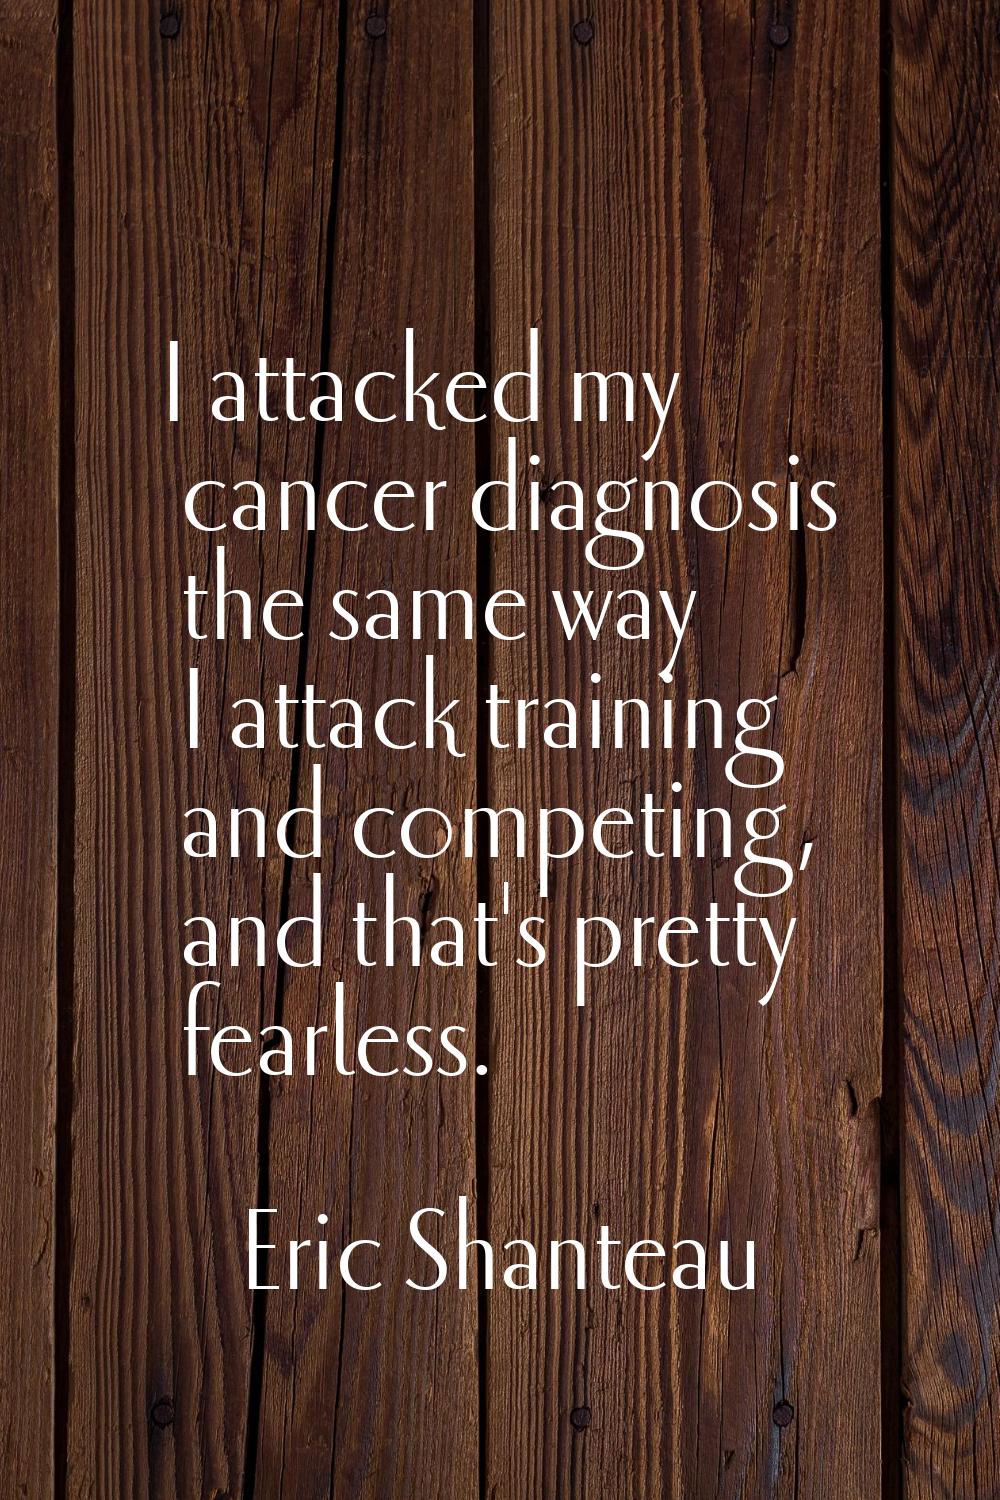 I attacked my cancer diagnosis the same way I attack training and competing, and that's pretty fear